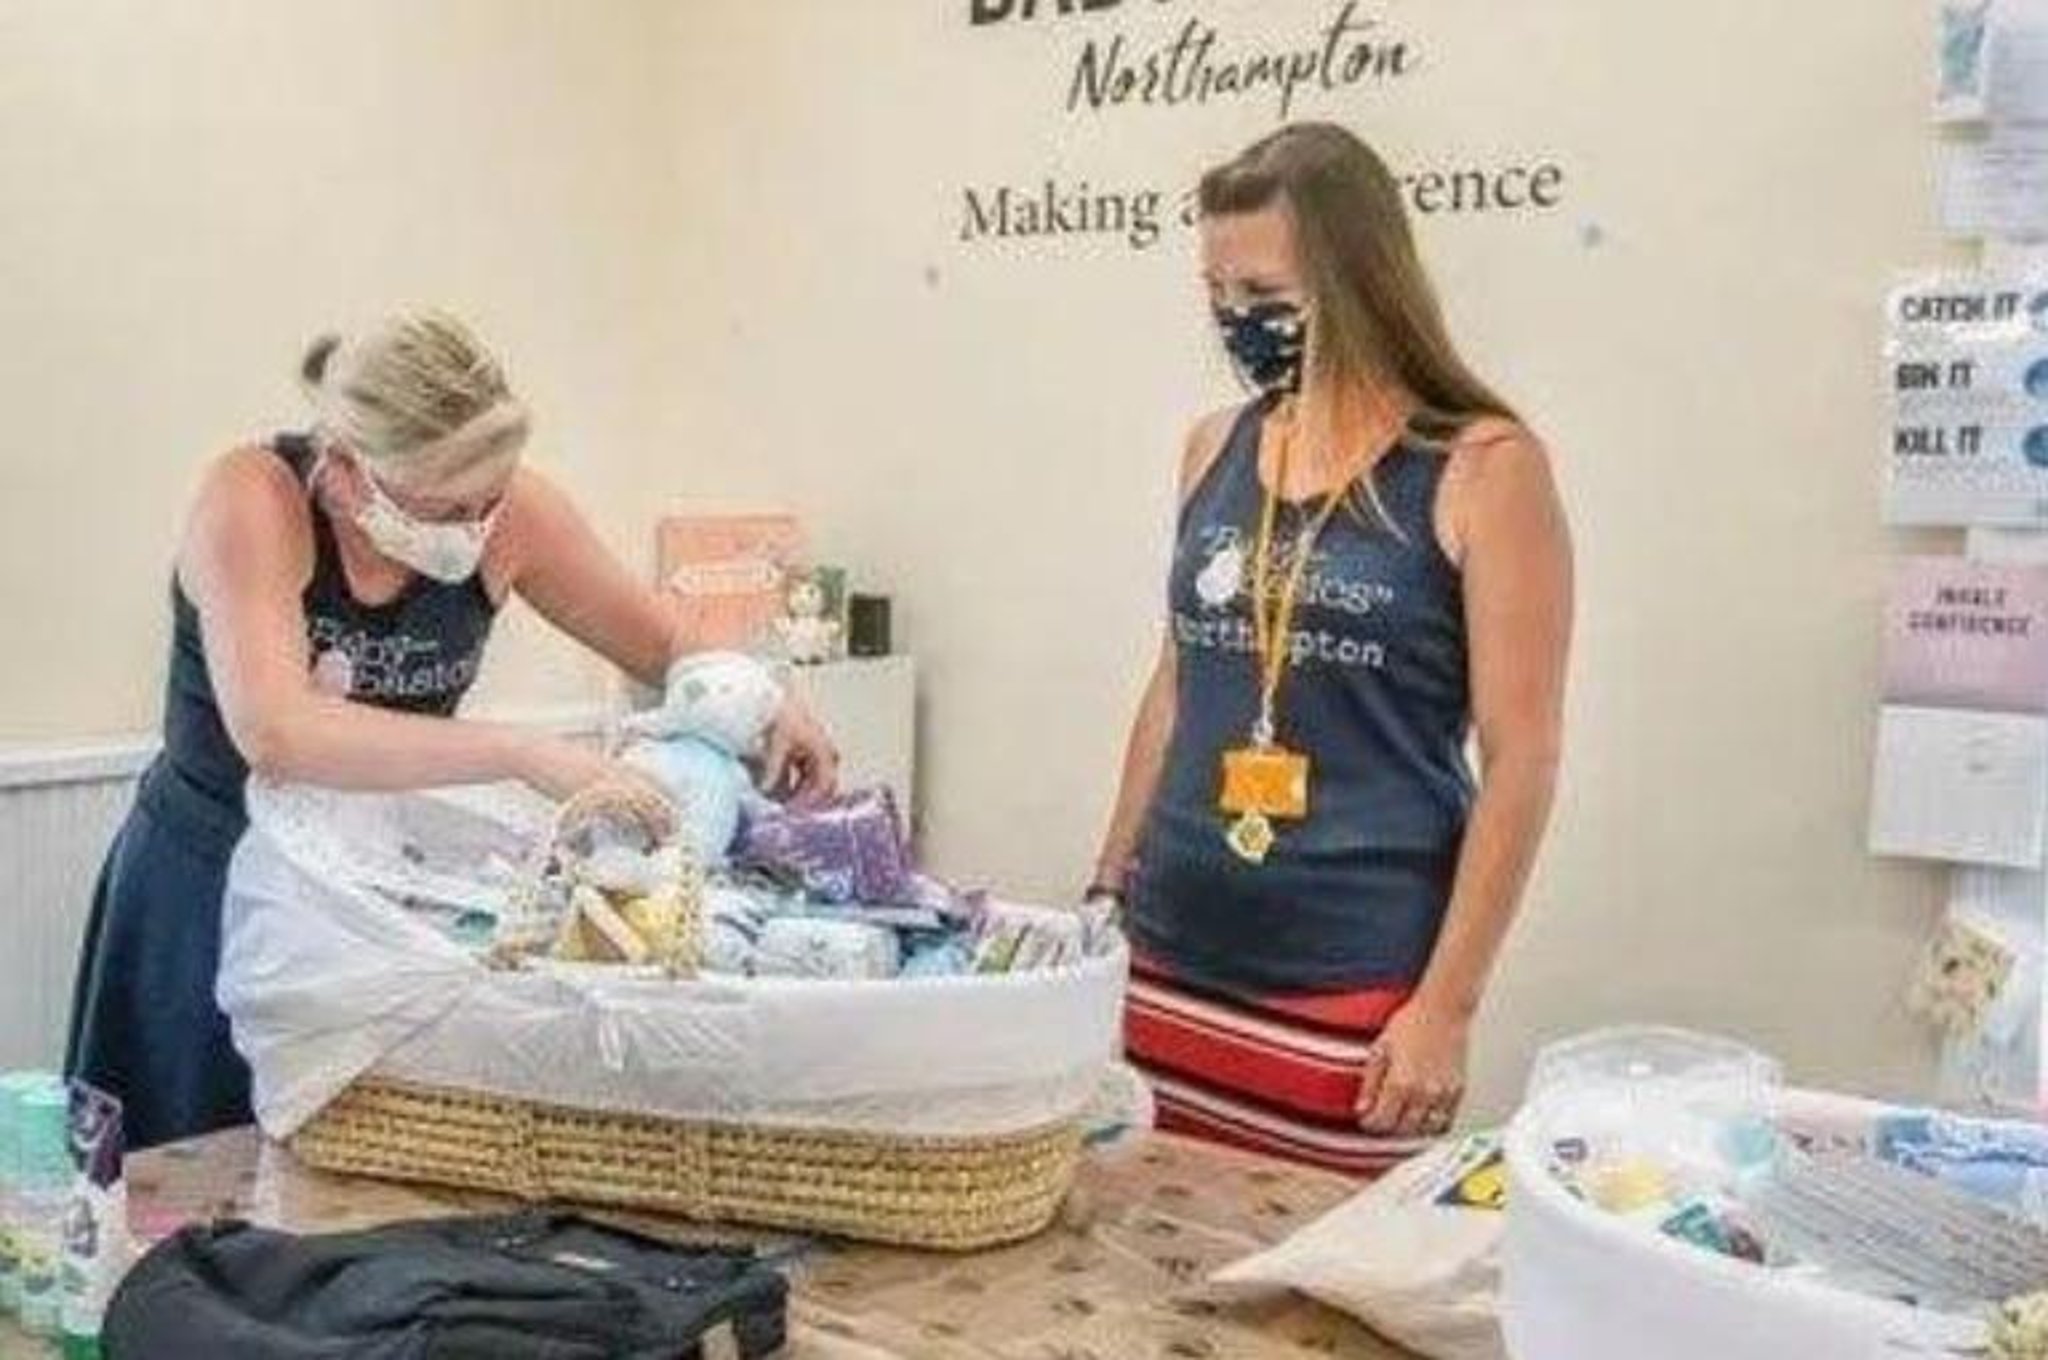 'We still need your support': Charity providing hampers to new parents across Northamptonshire needs volunteers